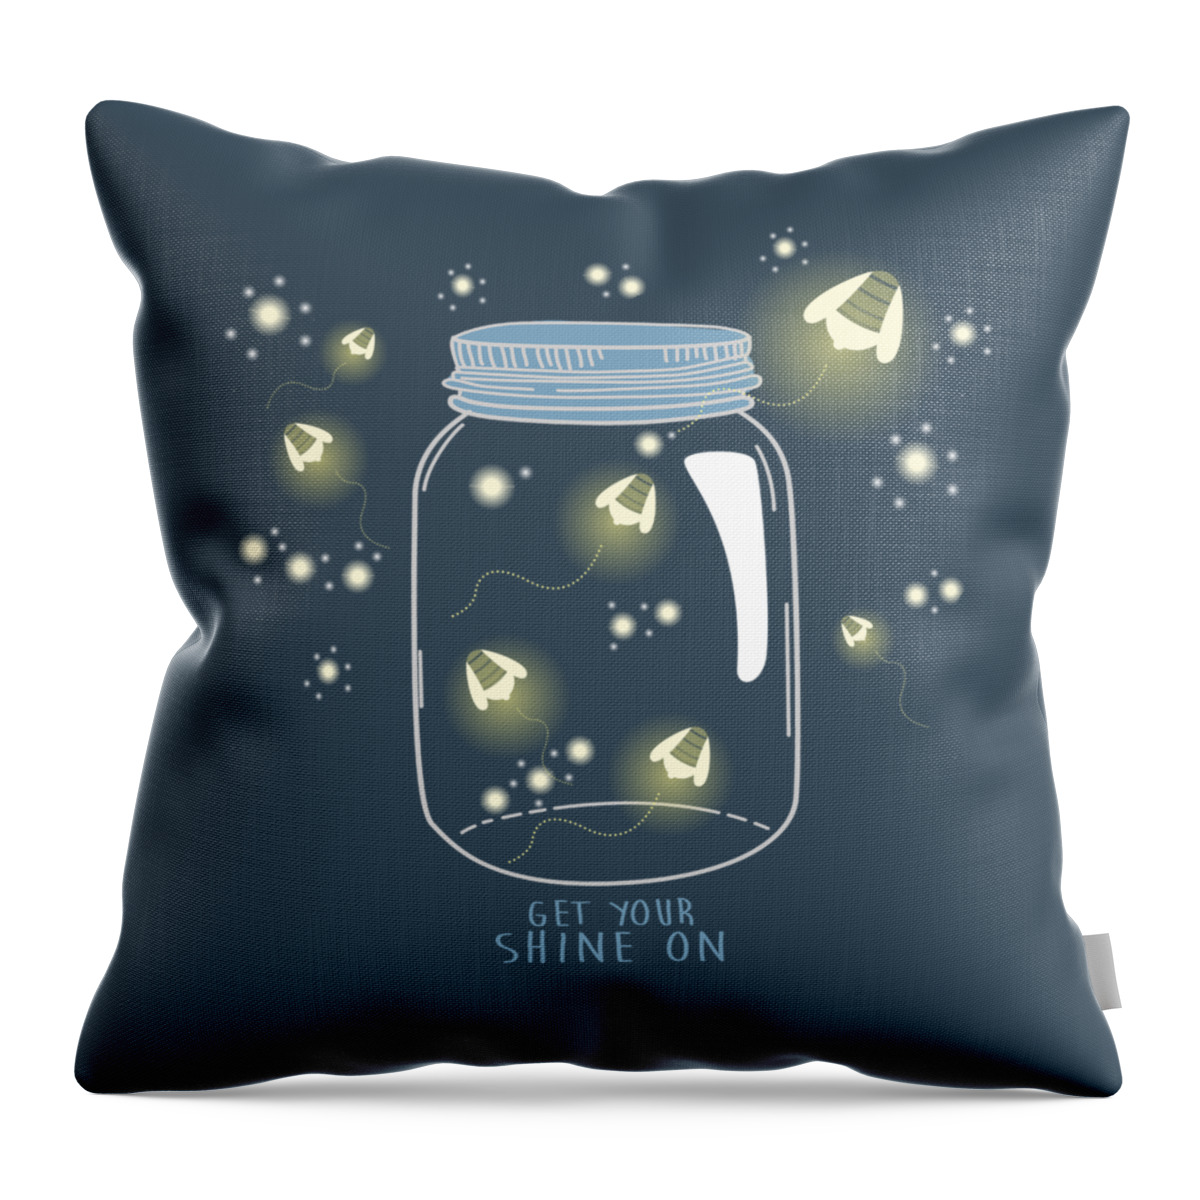 Get Your Shine On Throw Pillow featuring the digital art Get Your Shine On by Heather Applegate